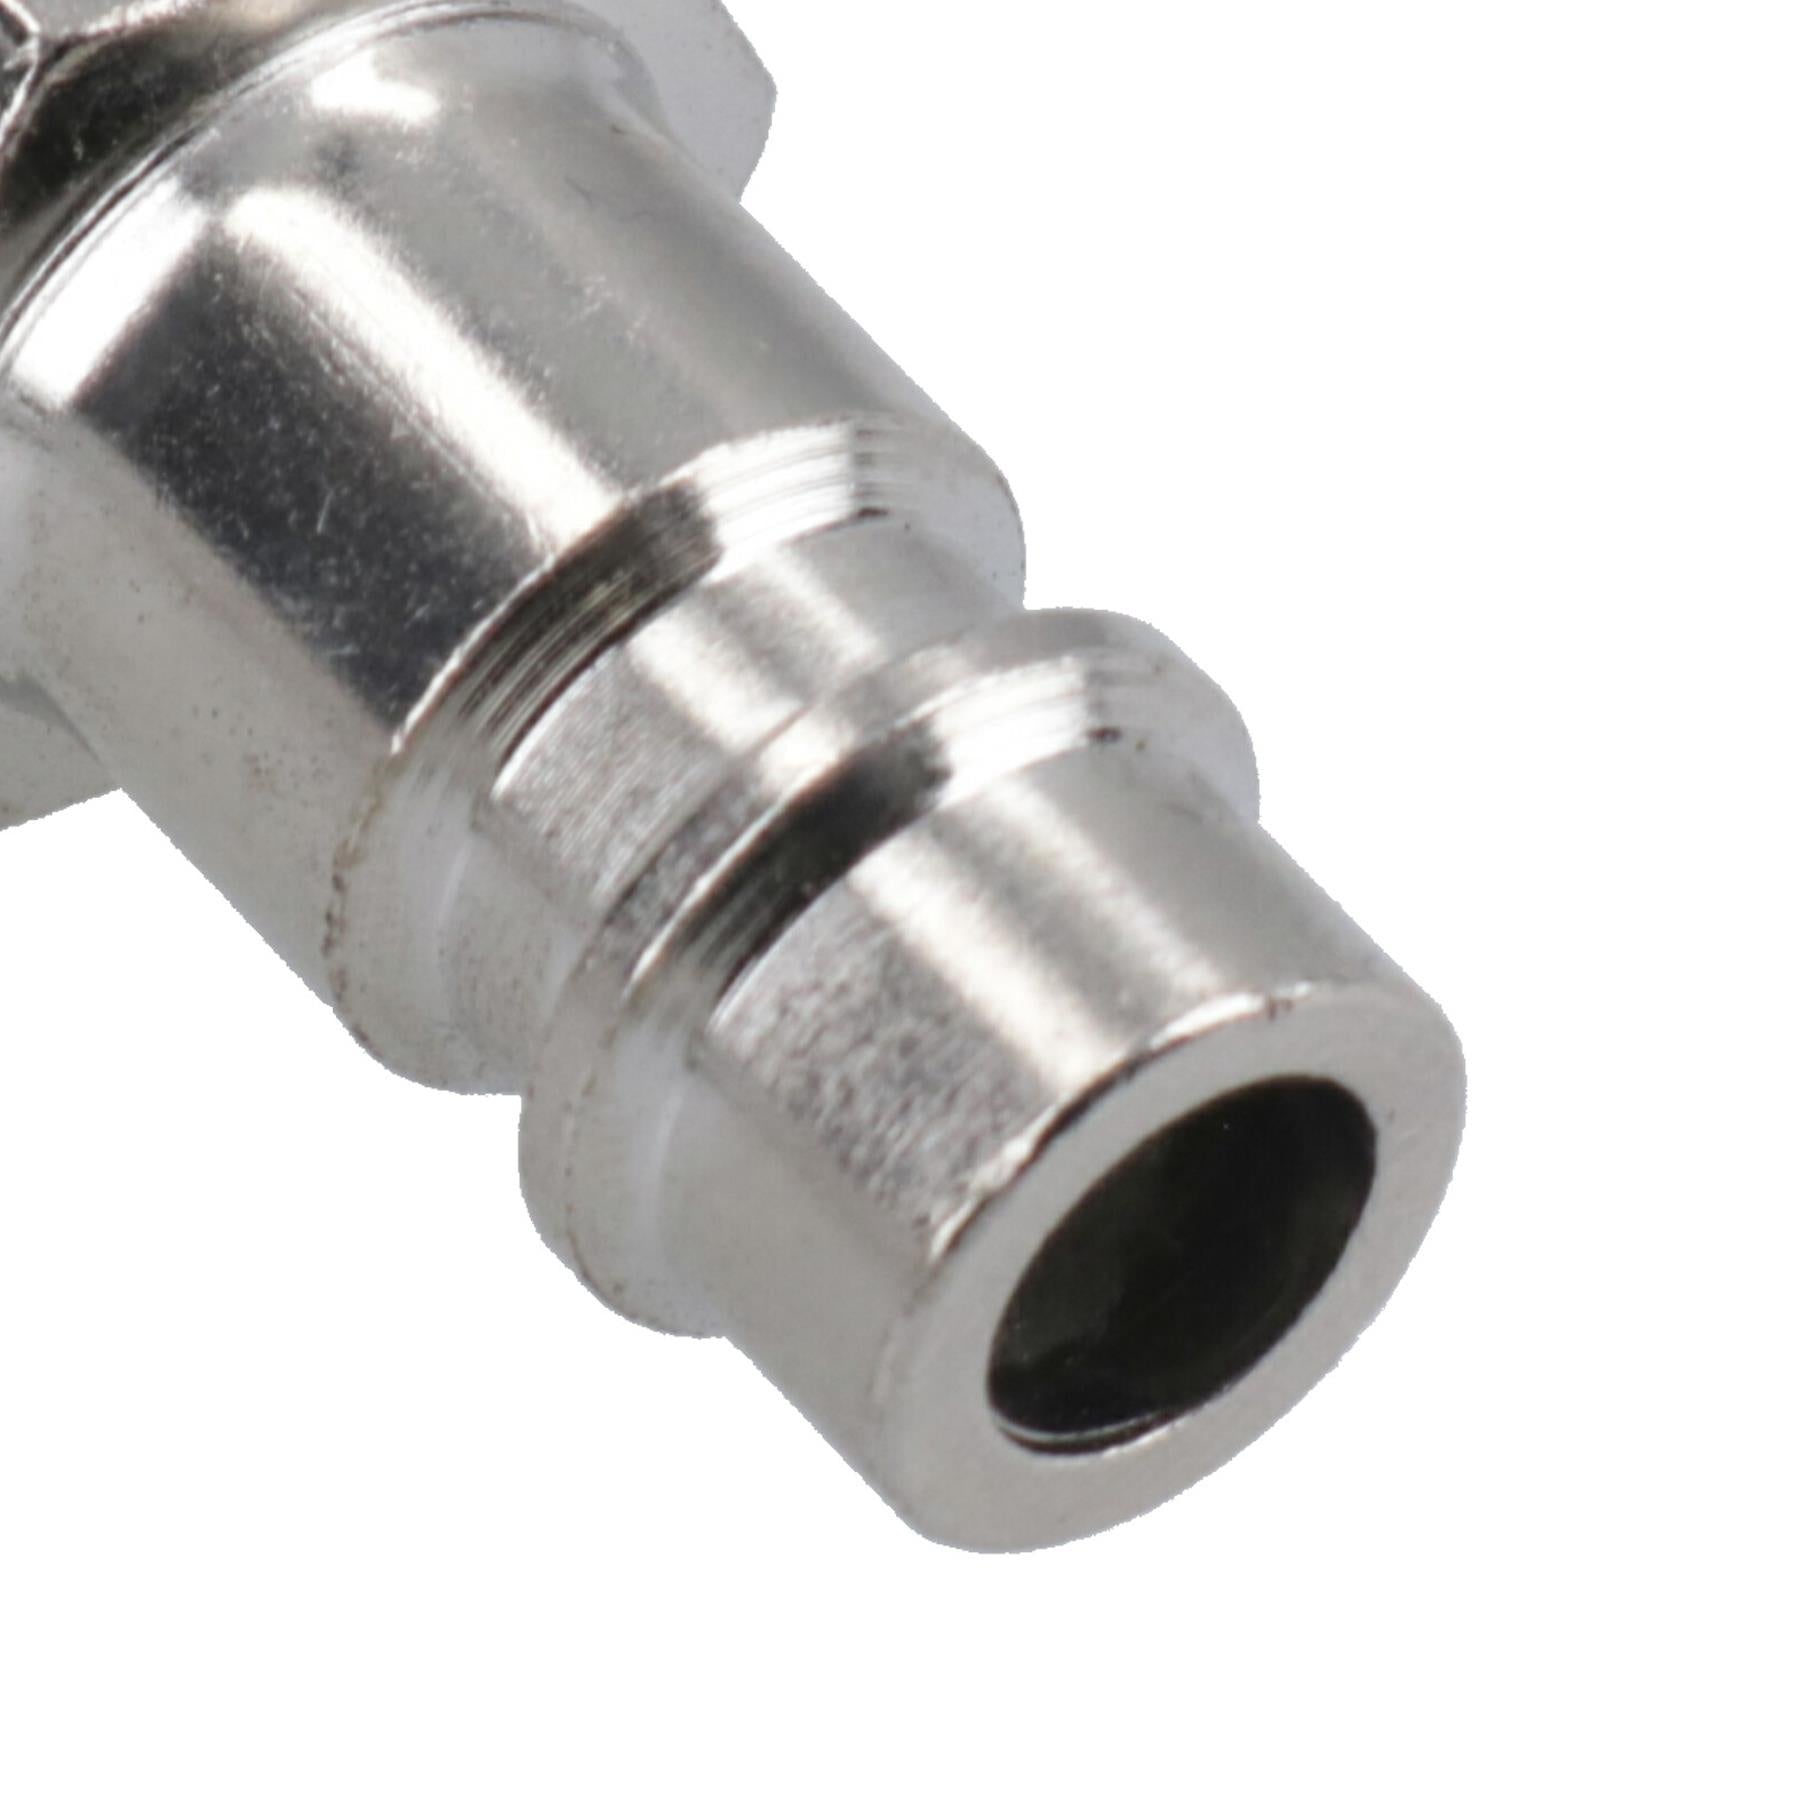 Euro Air Line Quick Release Hose Fitting Connector 1/4 BSP Female Thread